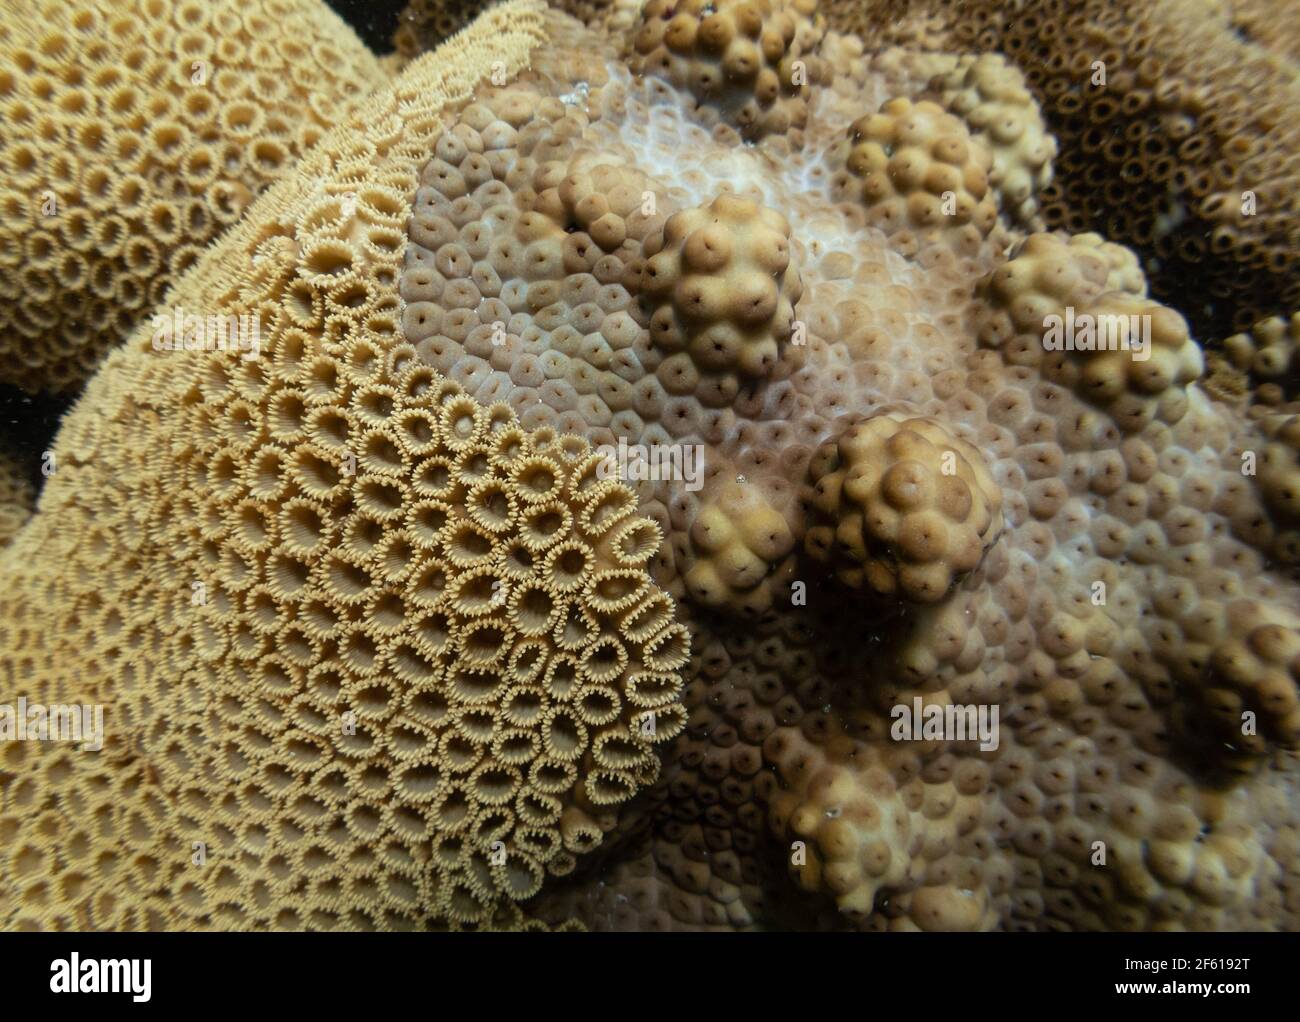 The coral Palythoa caribaeorum showing open and closed polyps, SE Brazil Stock Photo